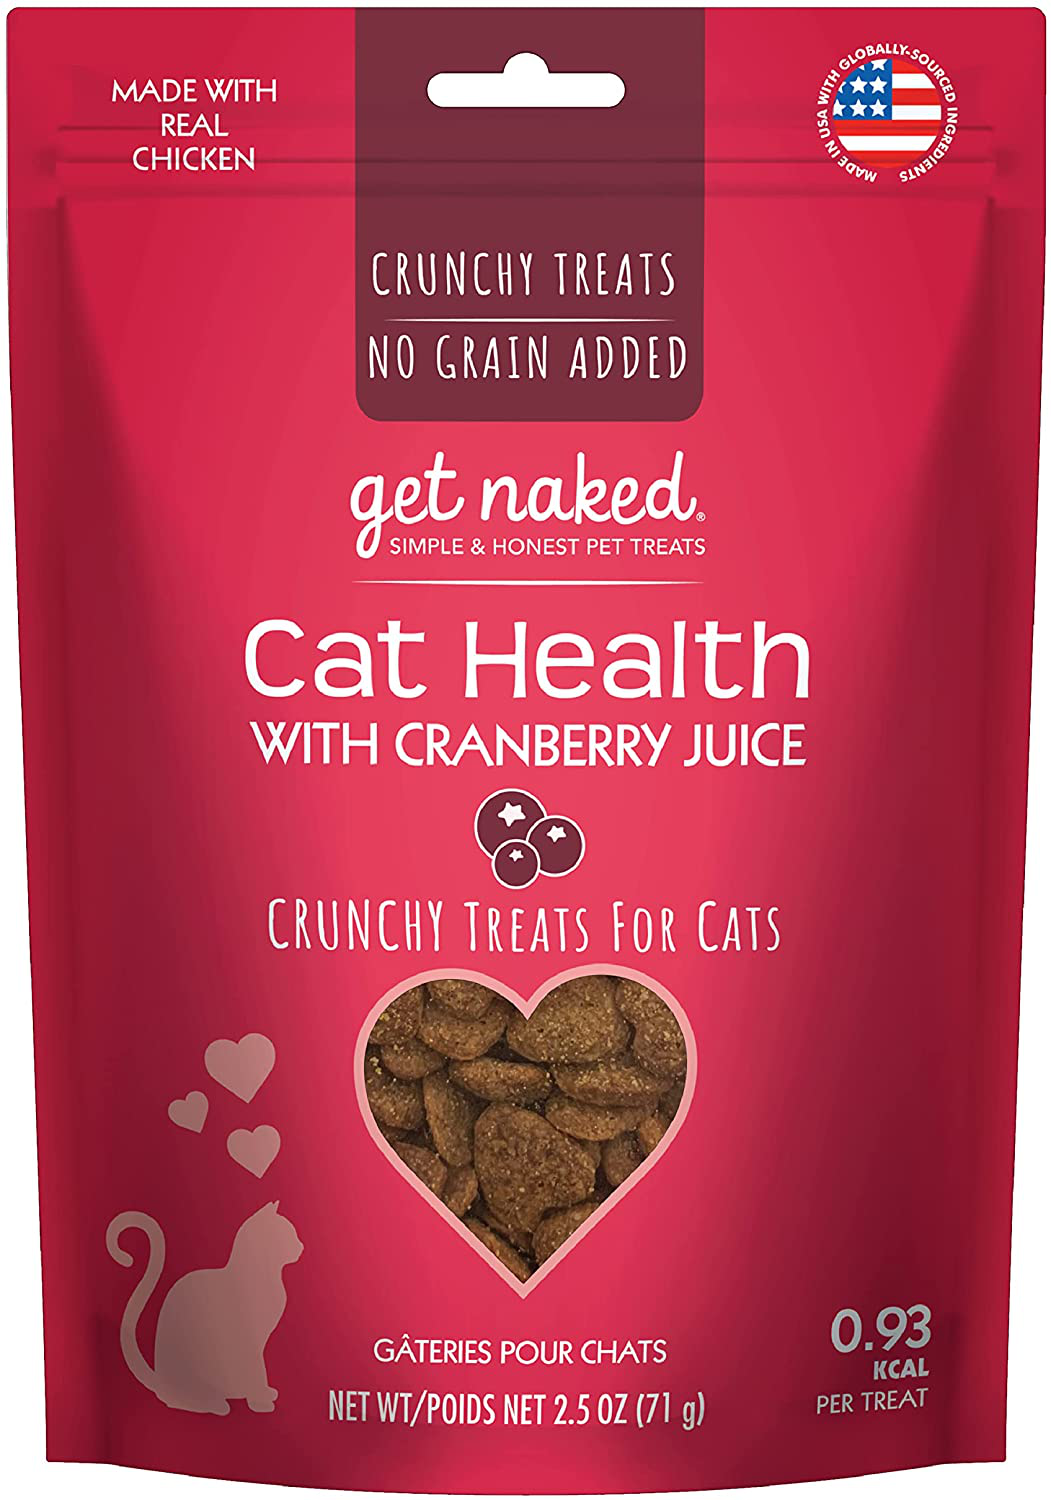 Get Naked Urinary Health Crunchy Treats for Cats, Cranberries, (1 Pouch), 2.5 Oz